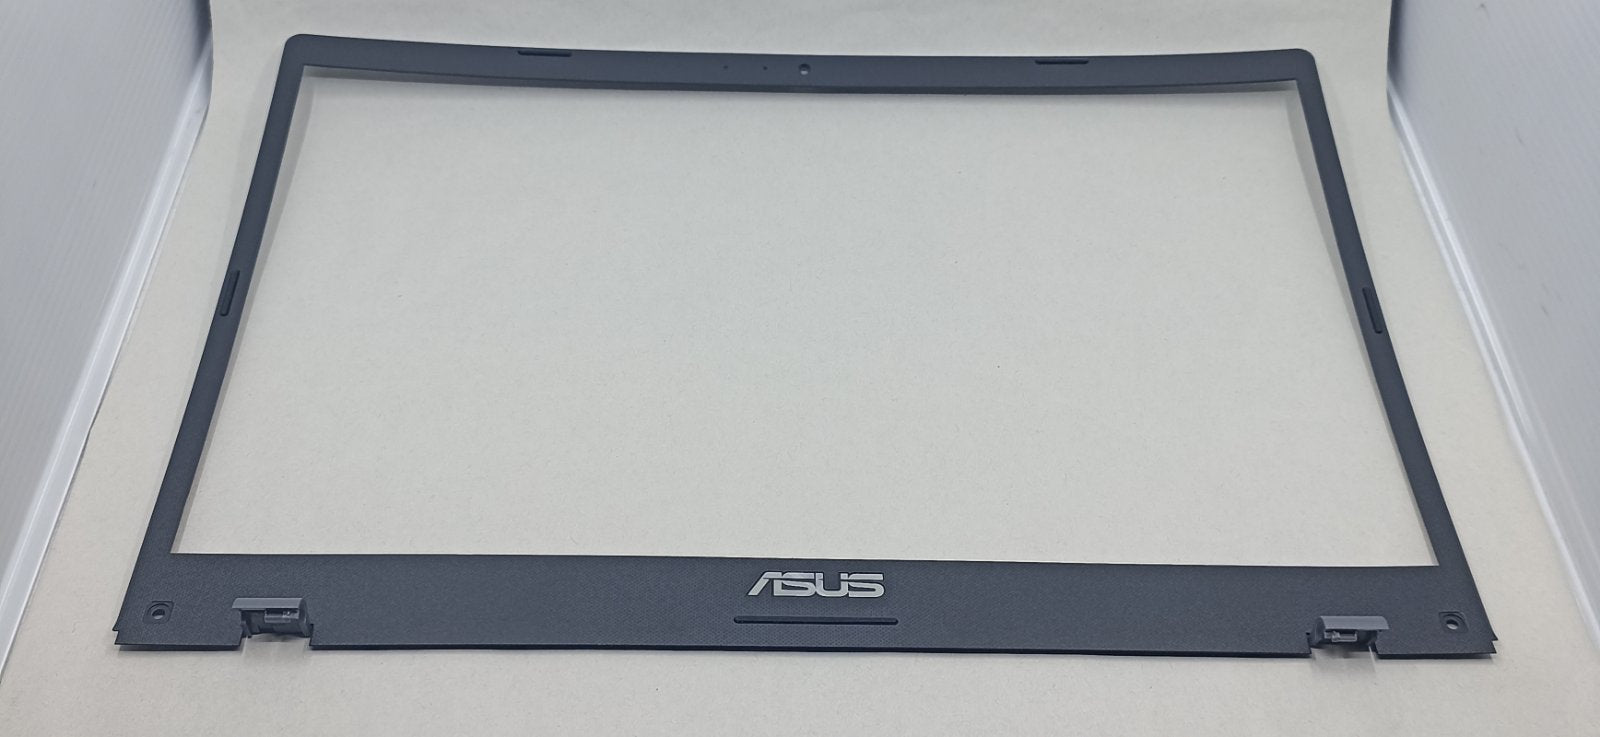 Replacement LCD Bezel for Asus X409UA WL